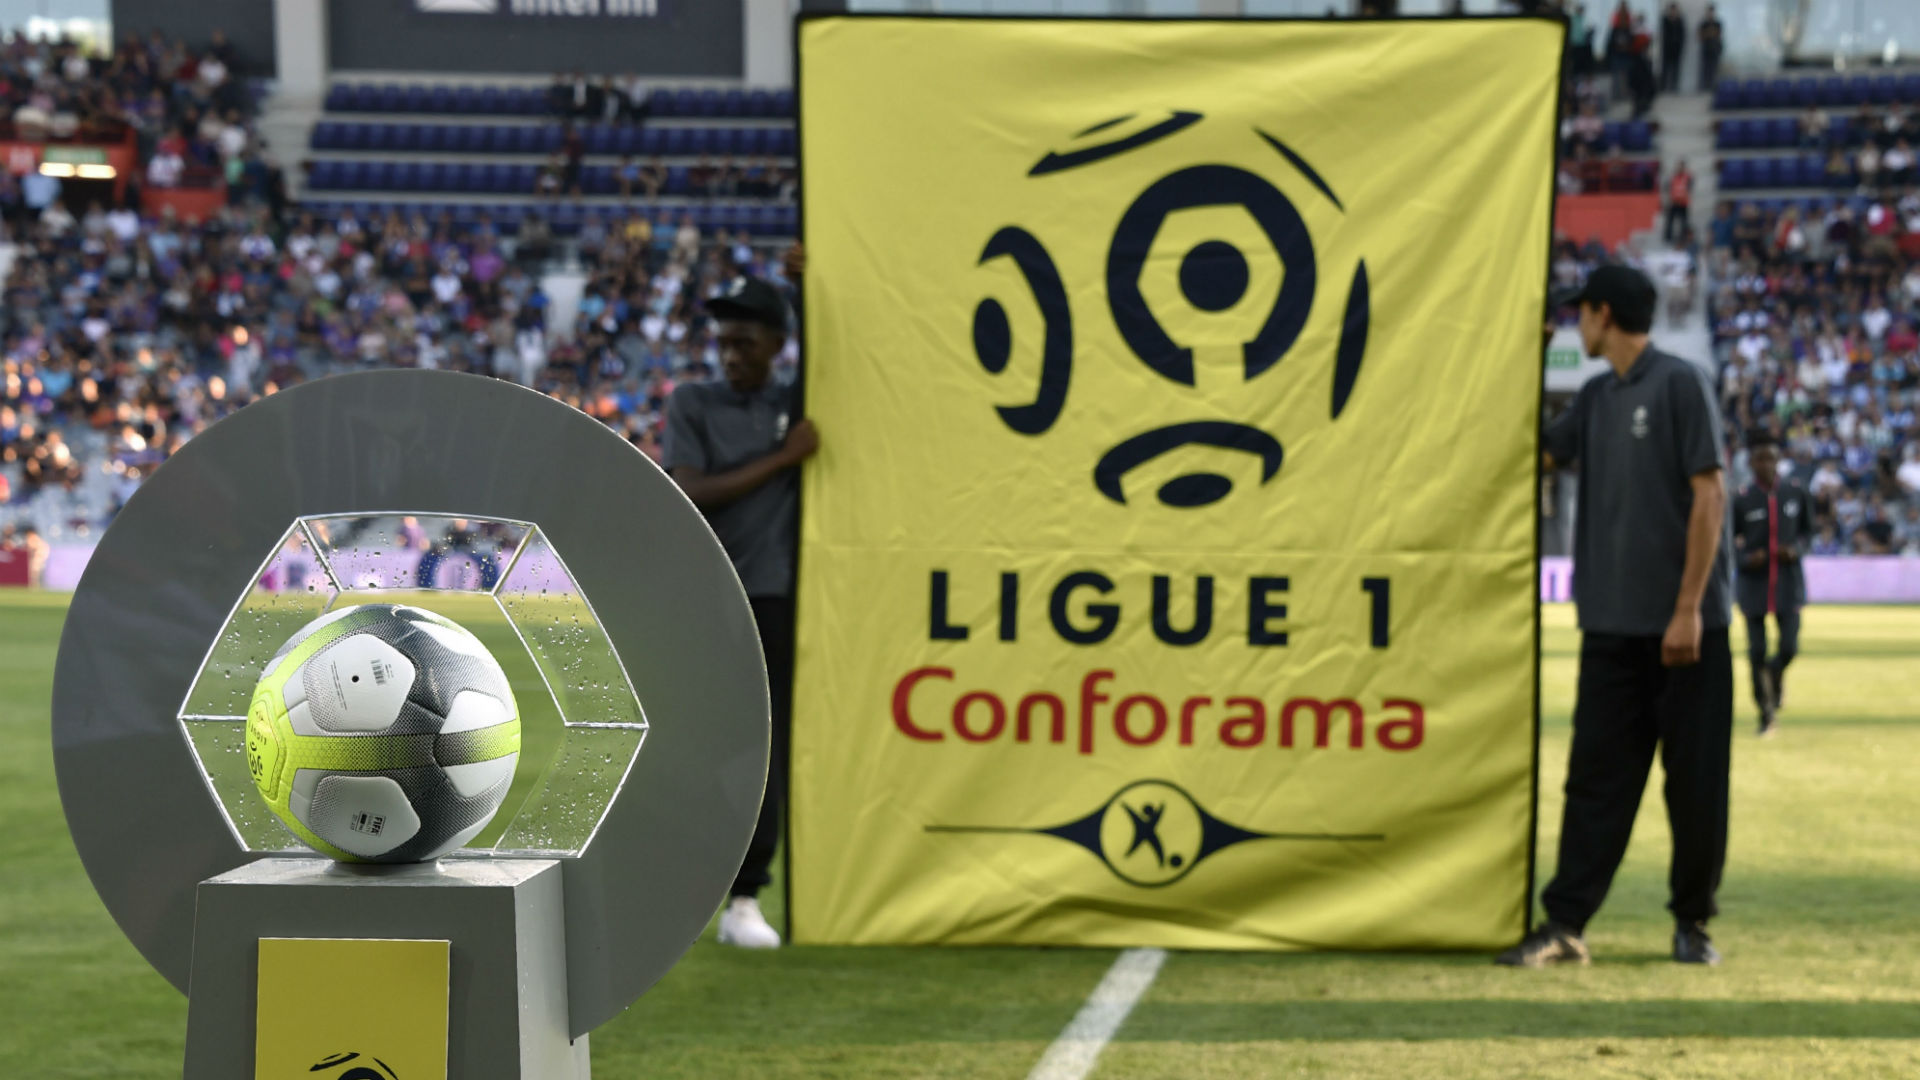 French court suspends relegation from Ligue 1